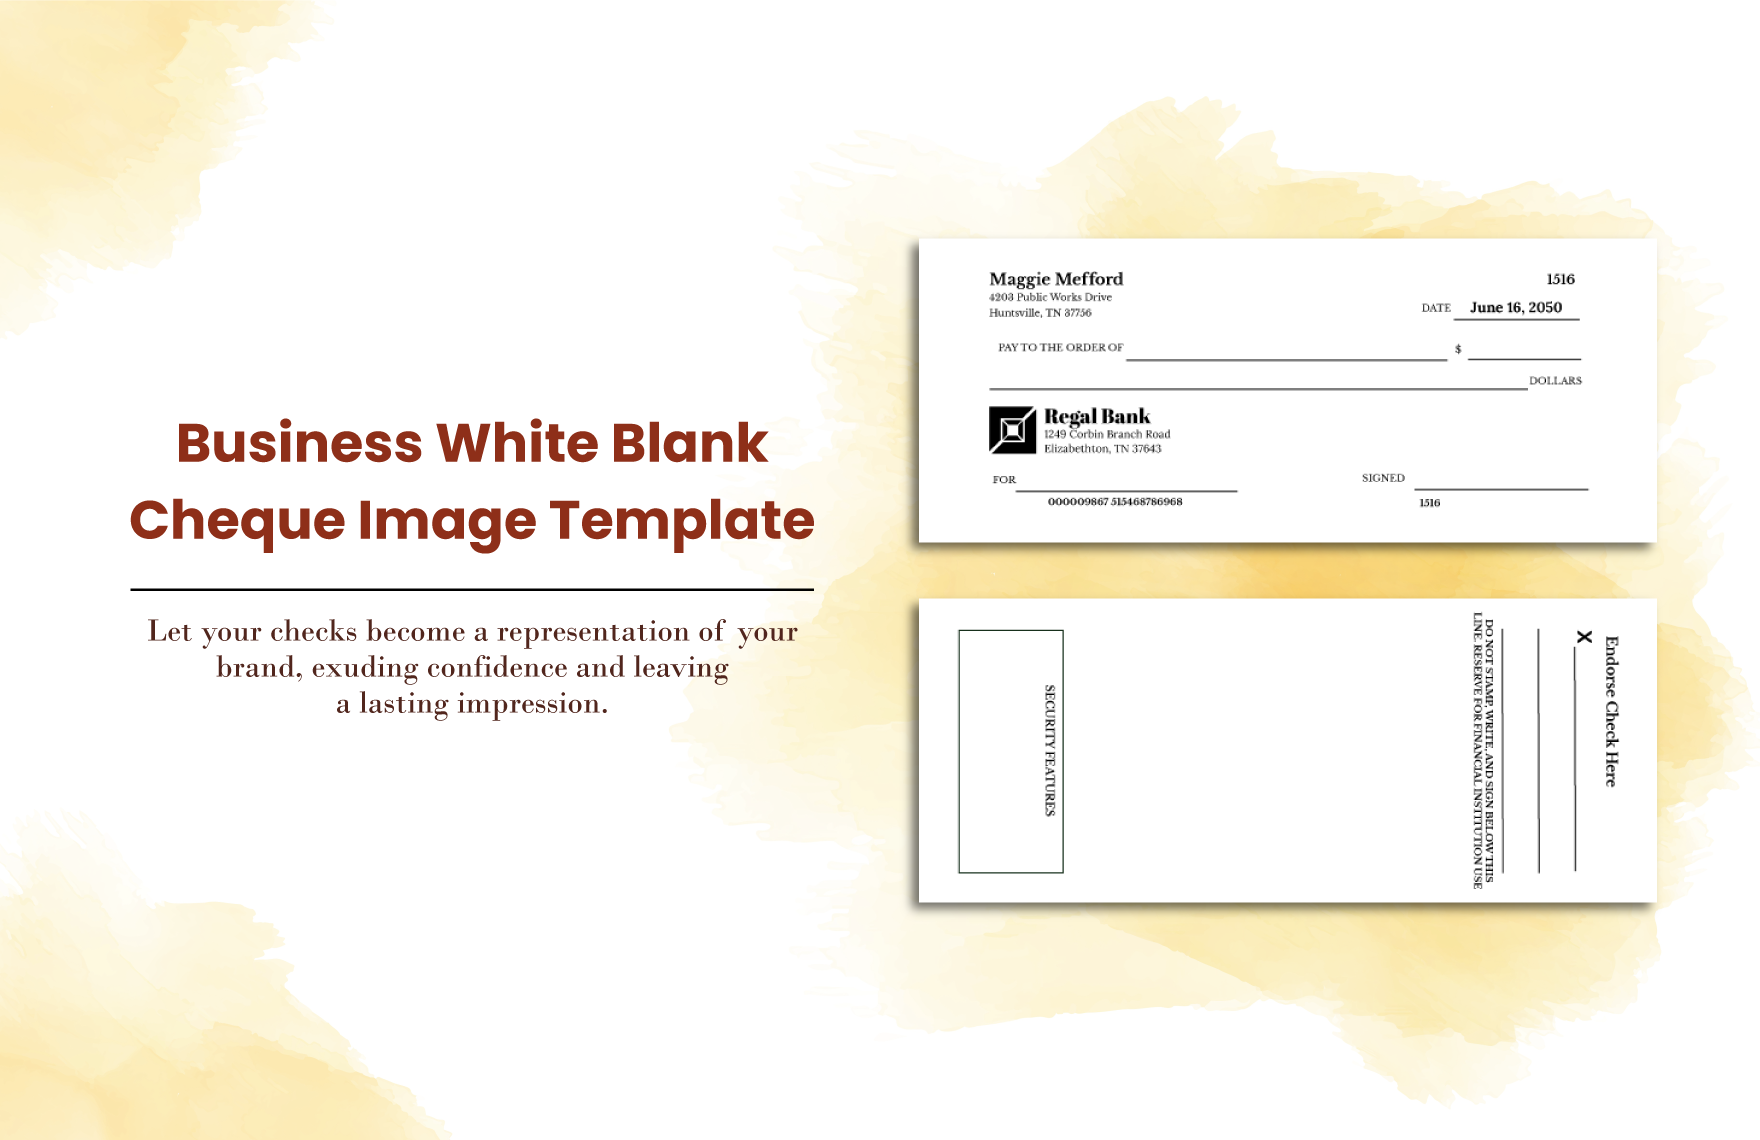 Business White Blank Cheque Image Template